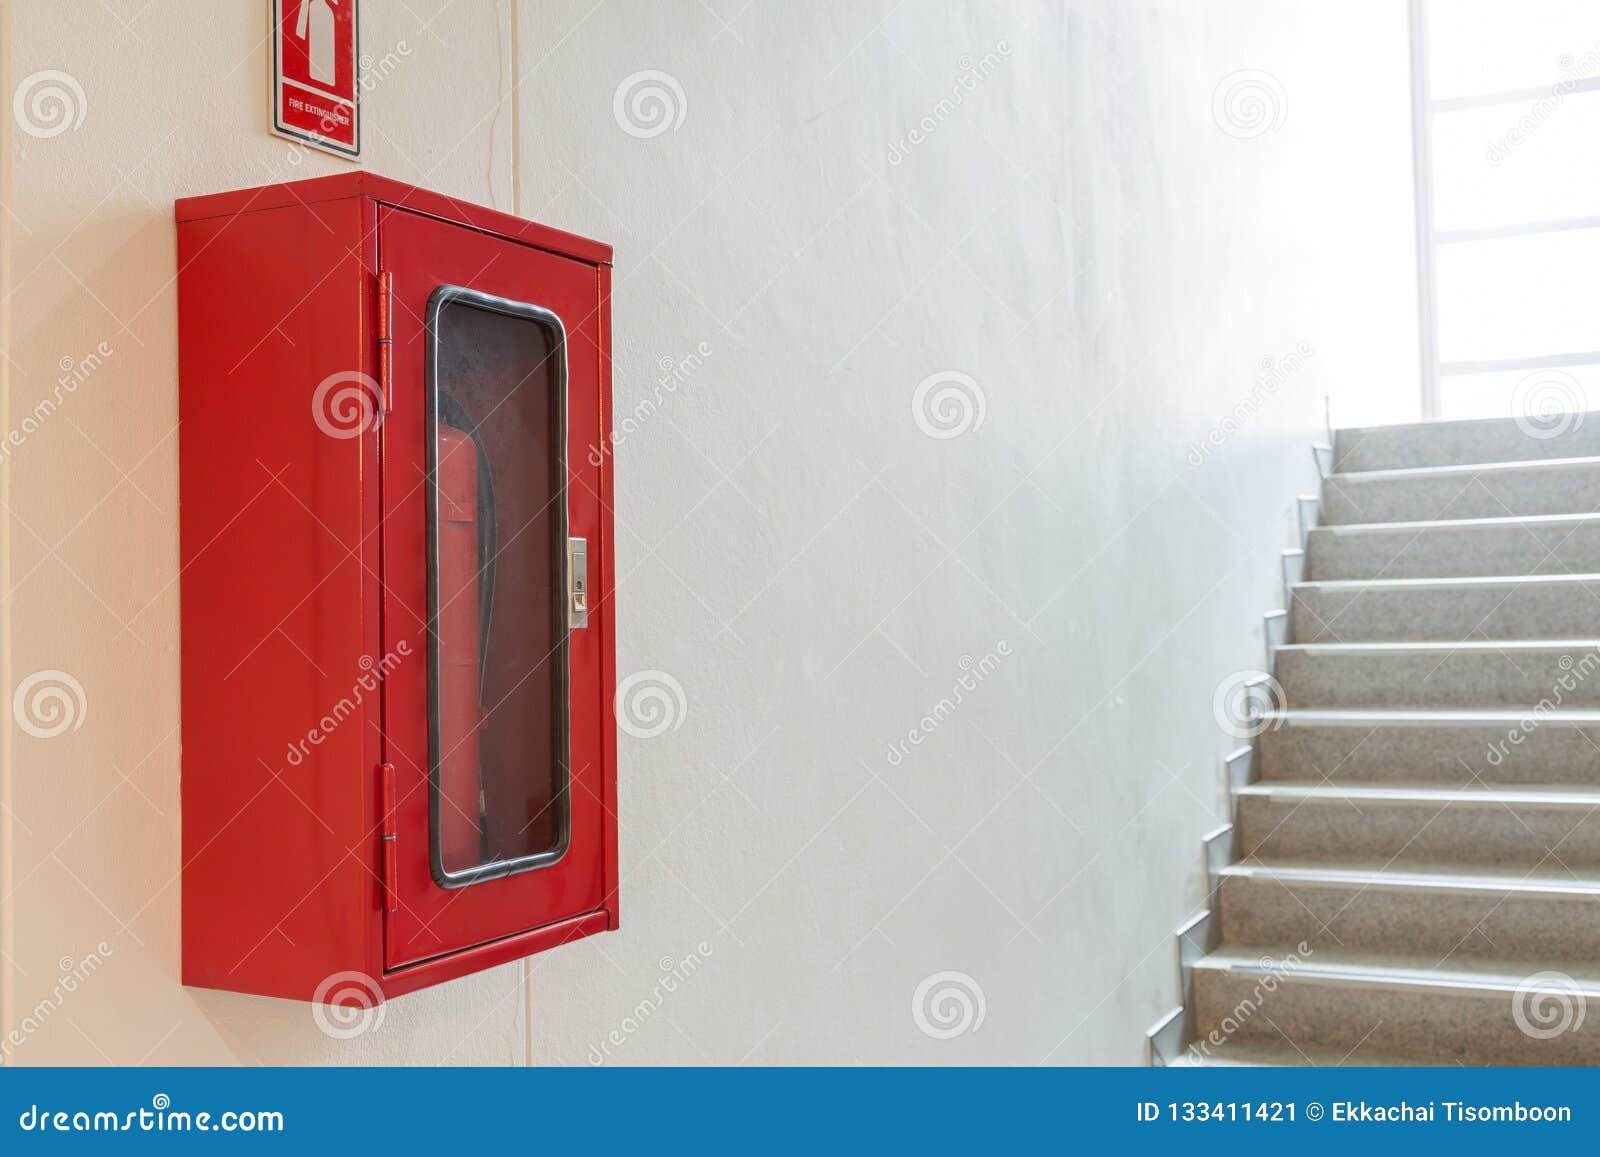 Fire Extinguisher Cabinet On White Wall Near Staircase Stock Image